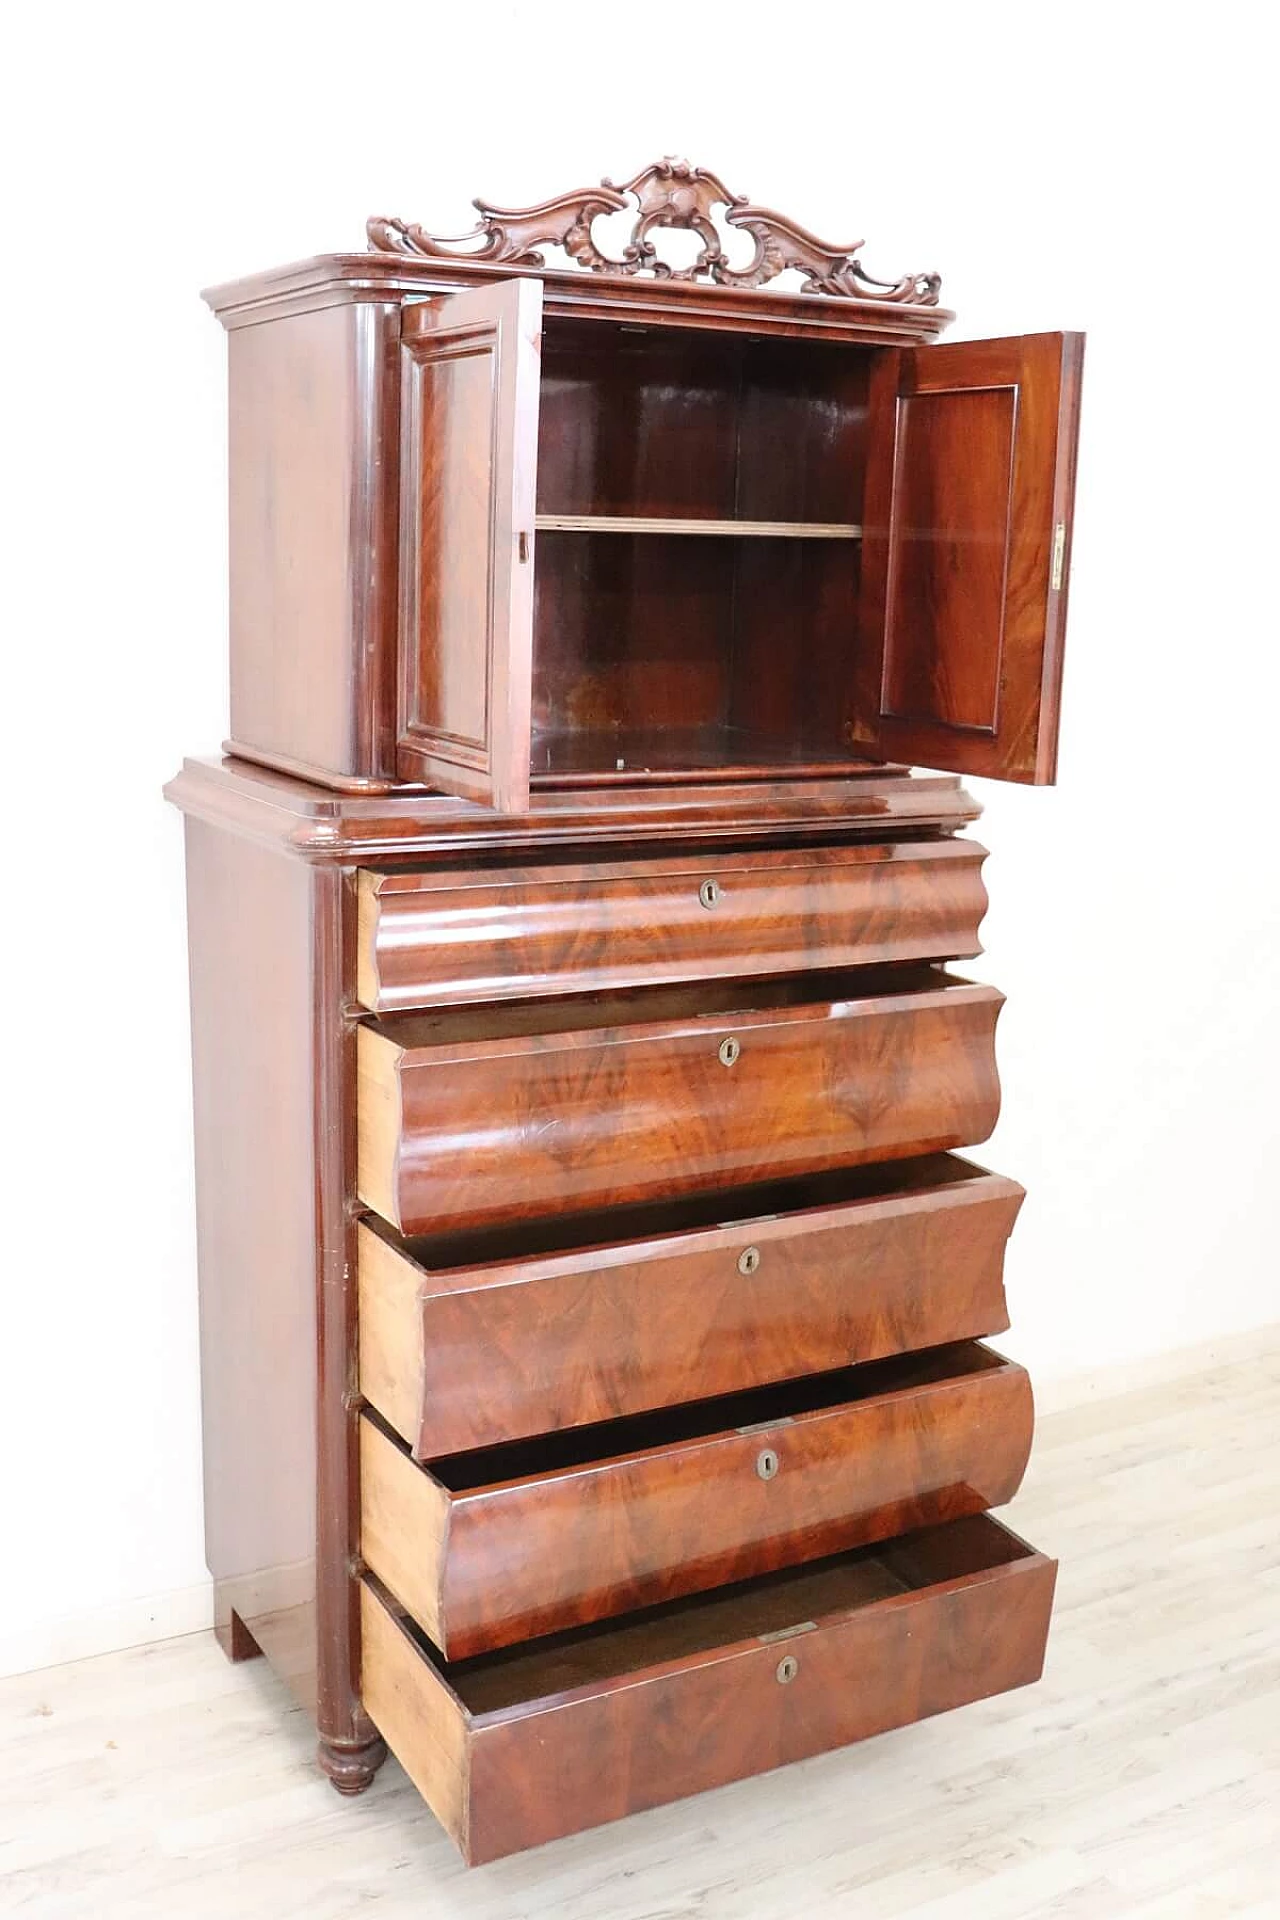 Antique chest of drawers with mahogany riser, 19th century 1067729